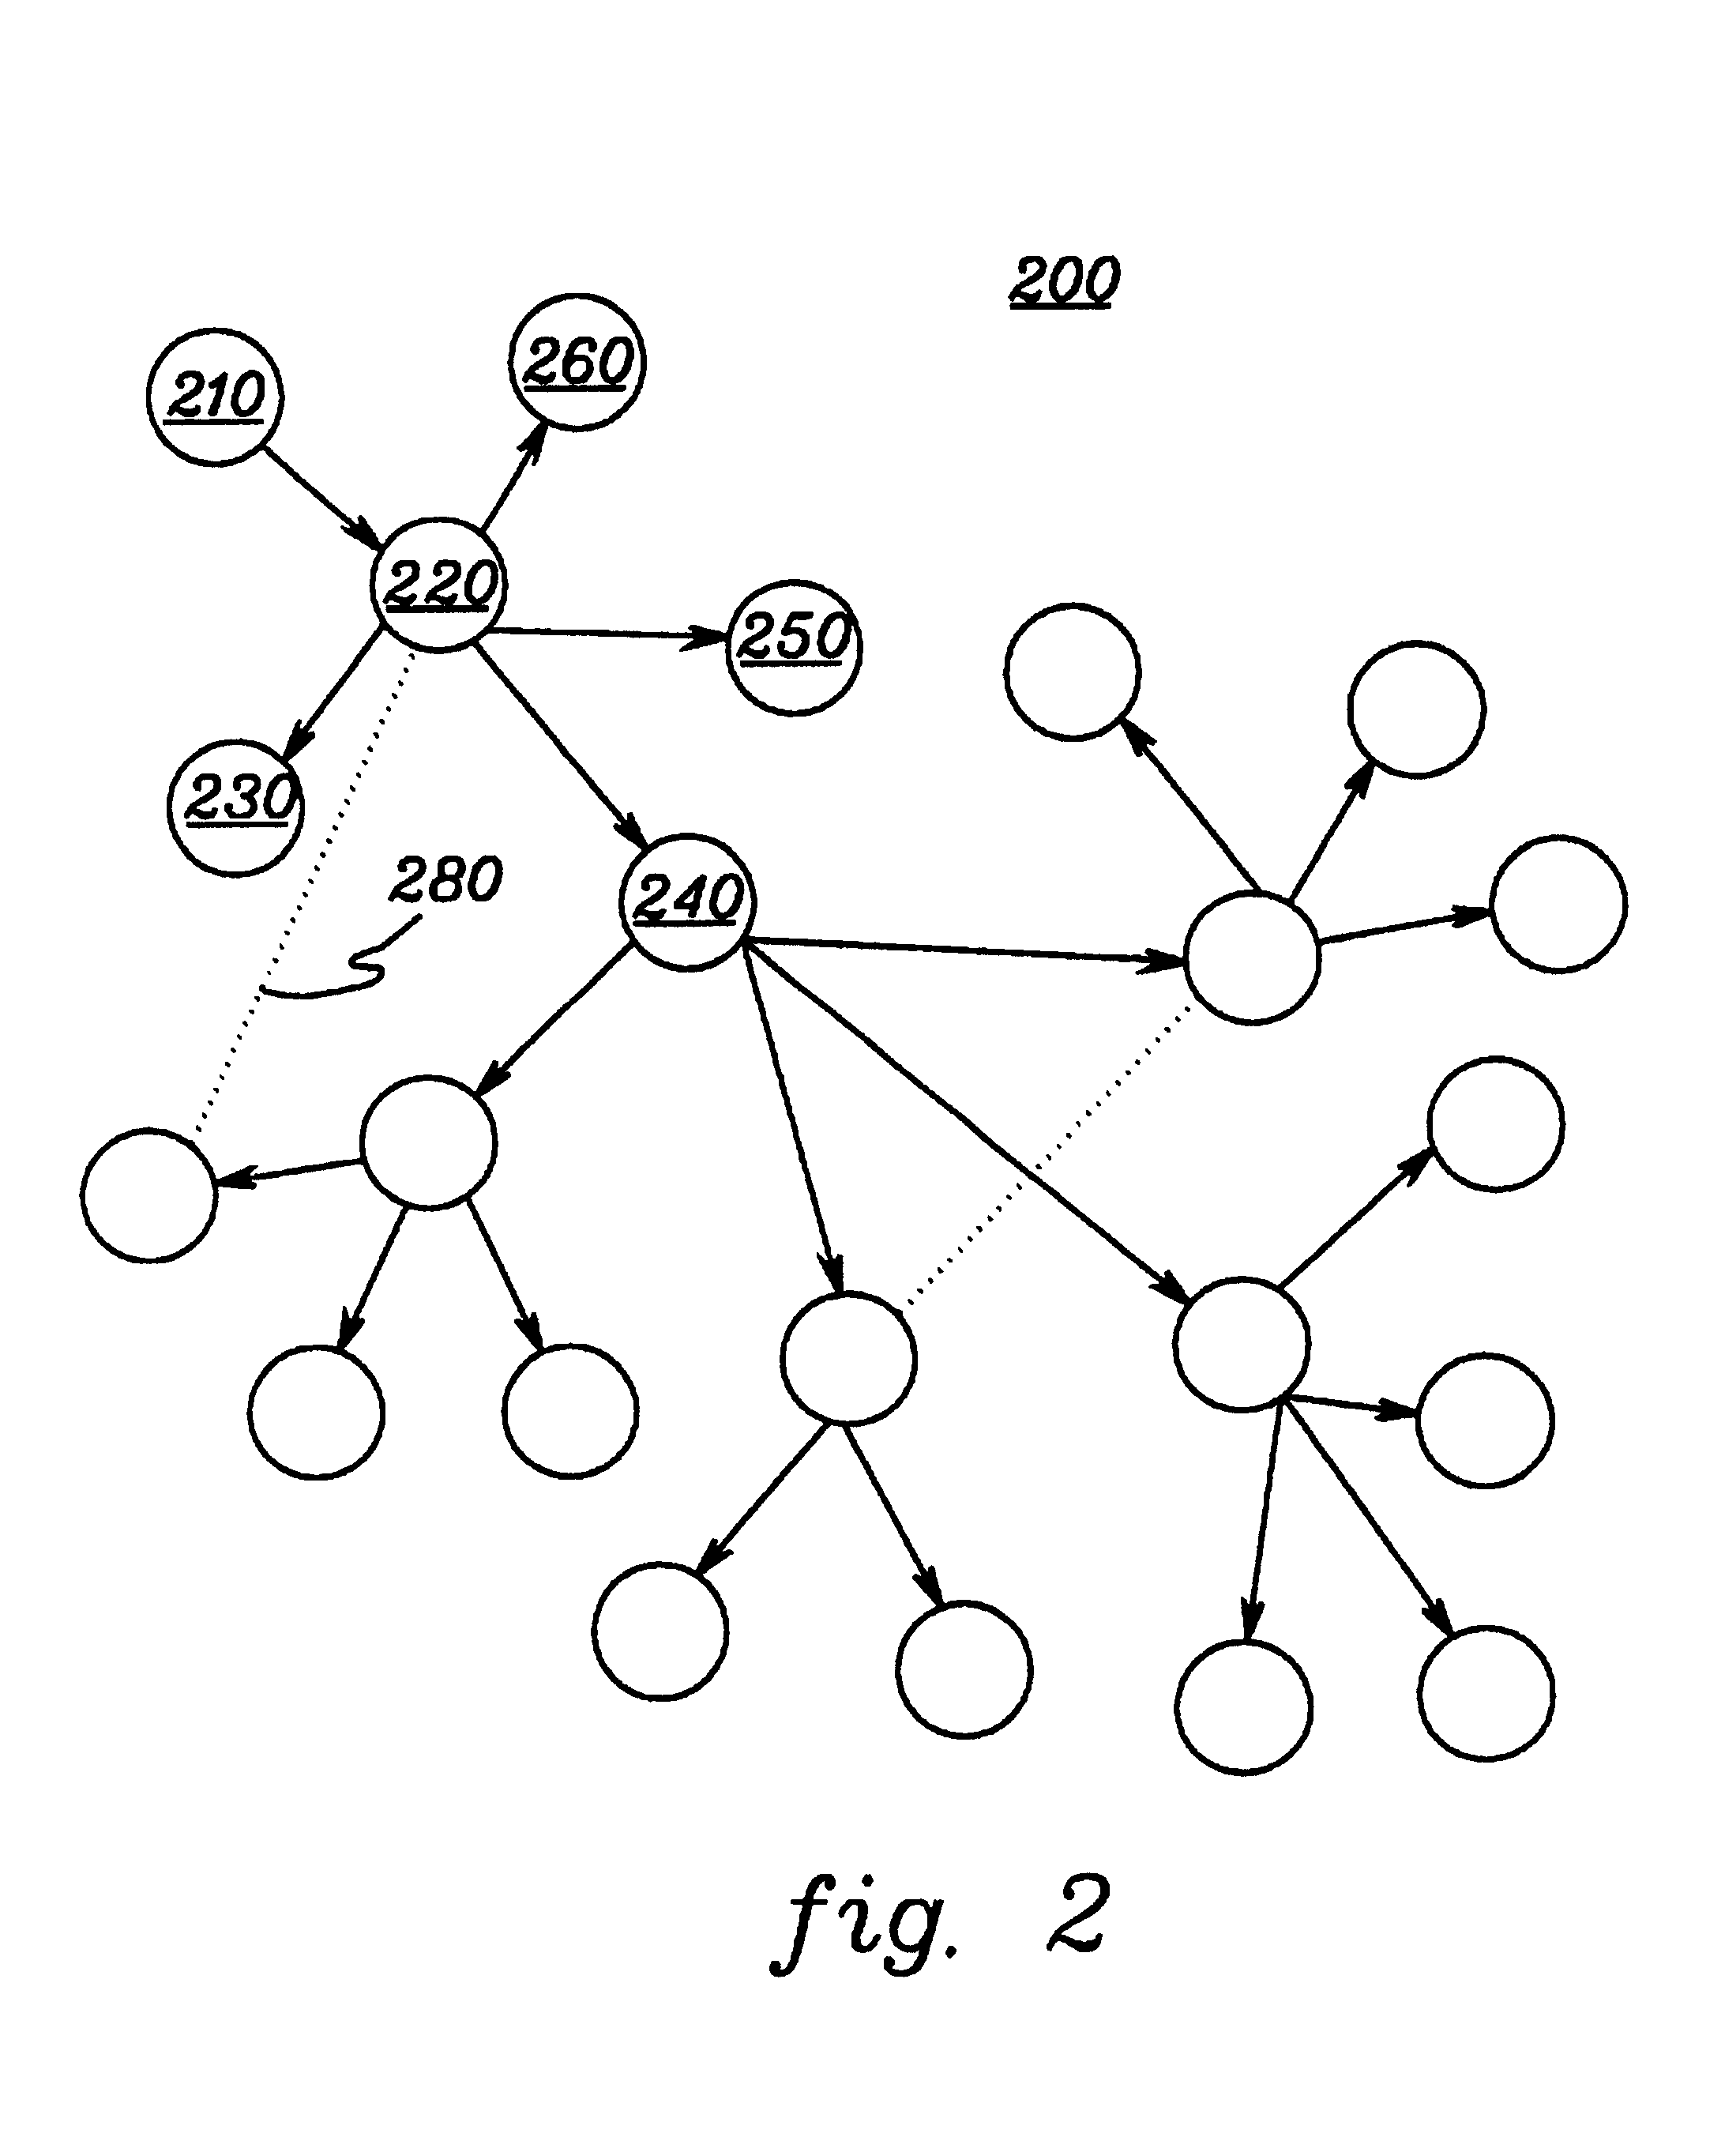 Scalable merge technique for information retrieval across a distributed network